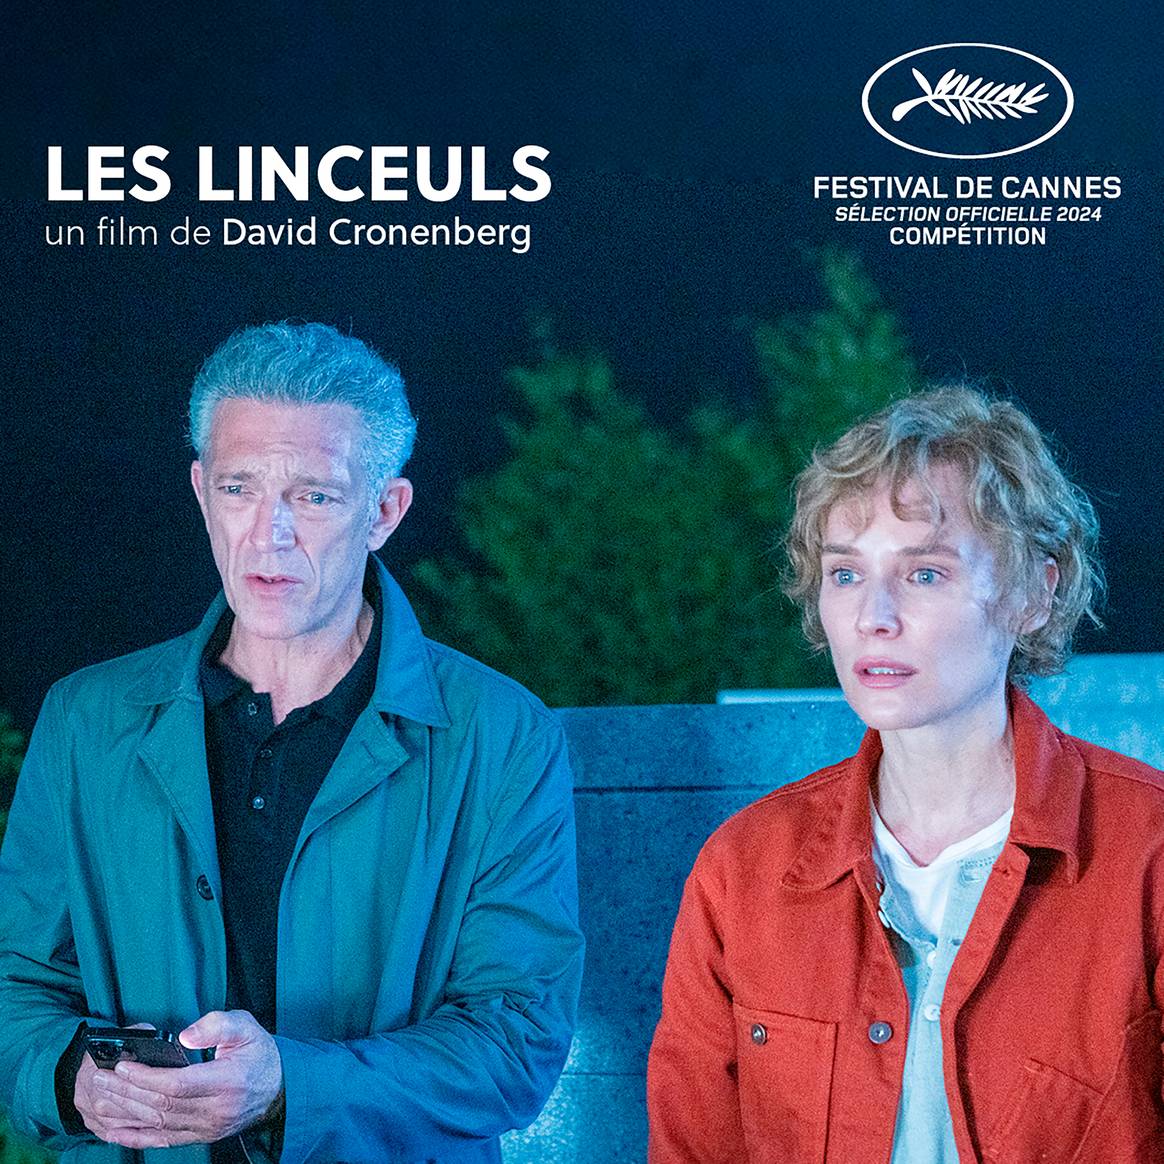 Campaign for Les Linceuls.